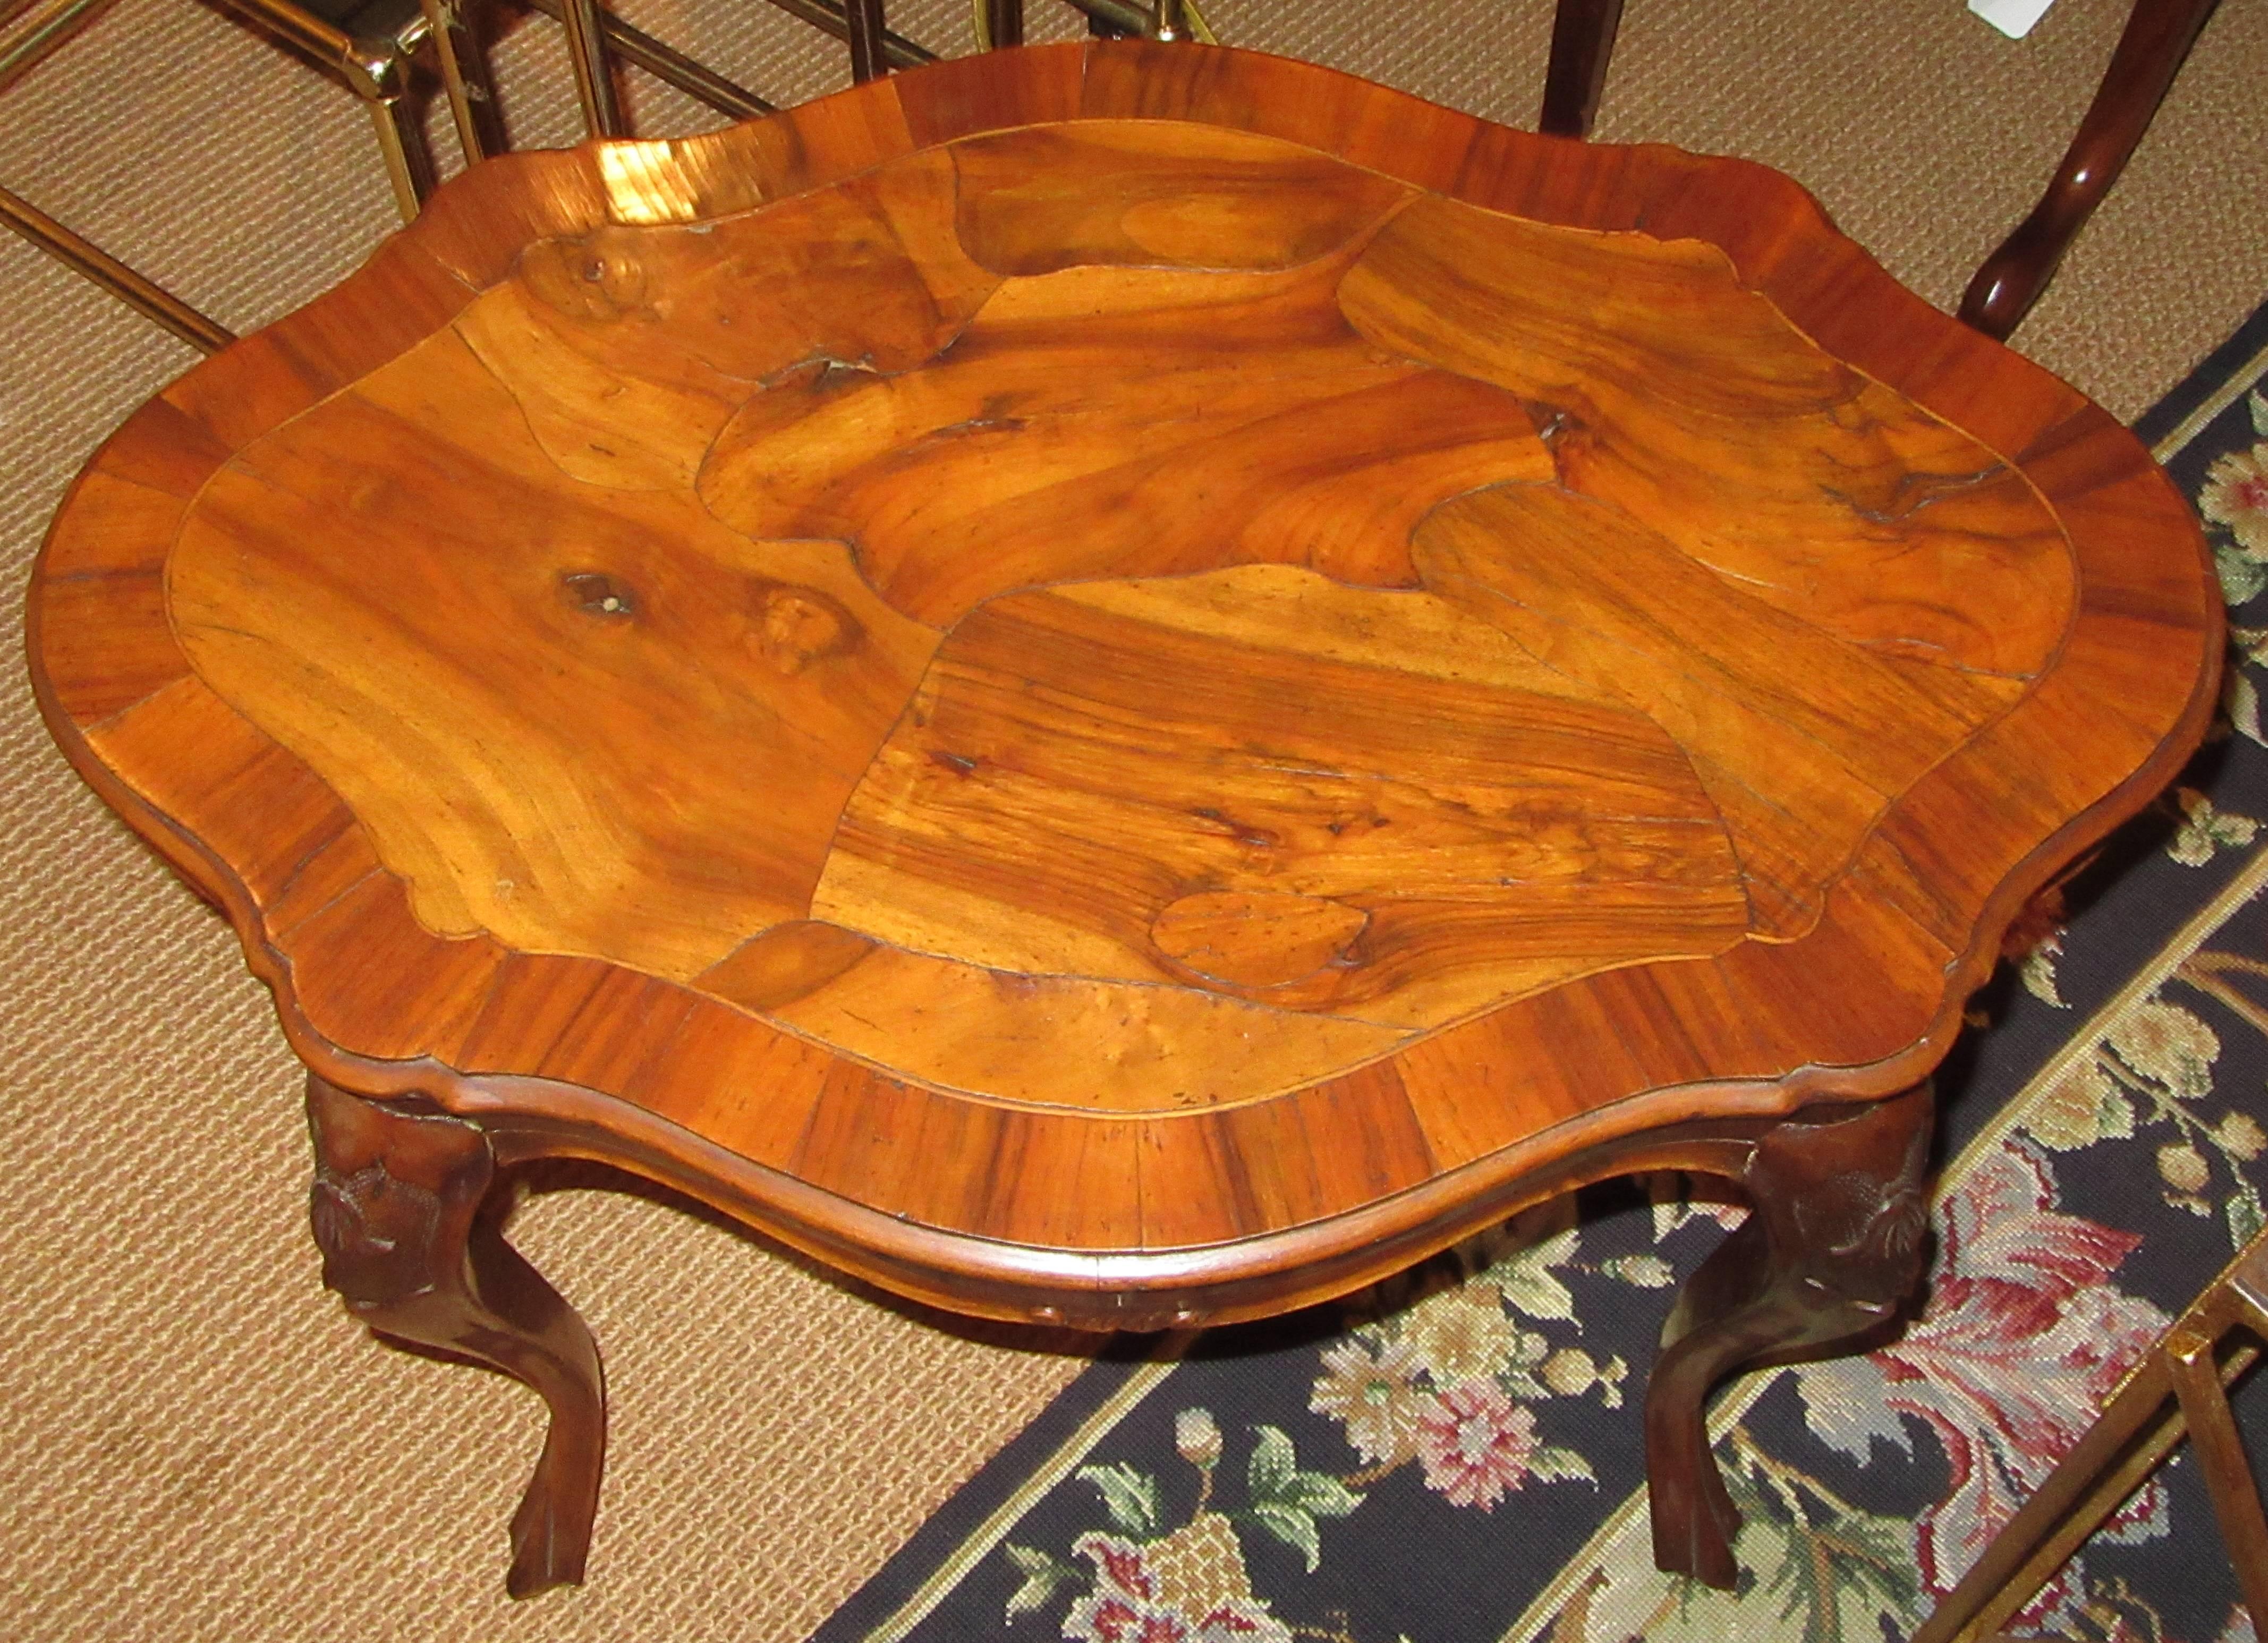 A small wood end or coffee table with a unique top of abstract form marquetry veneer, emphasizing the beautiful grain of the wood (walnut).